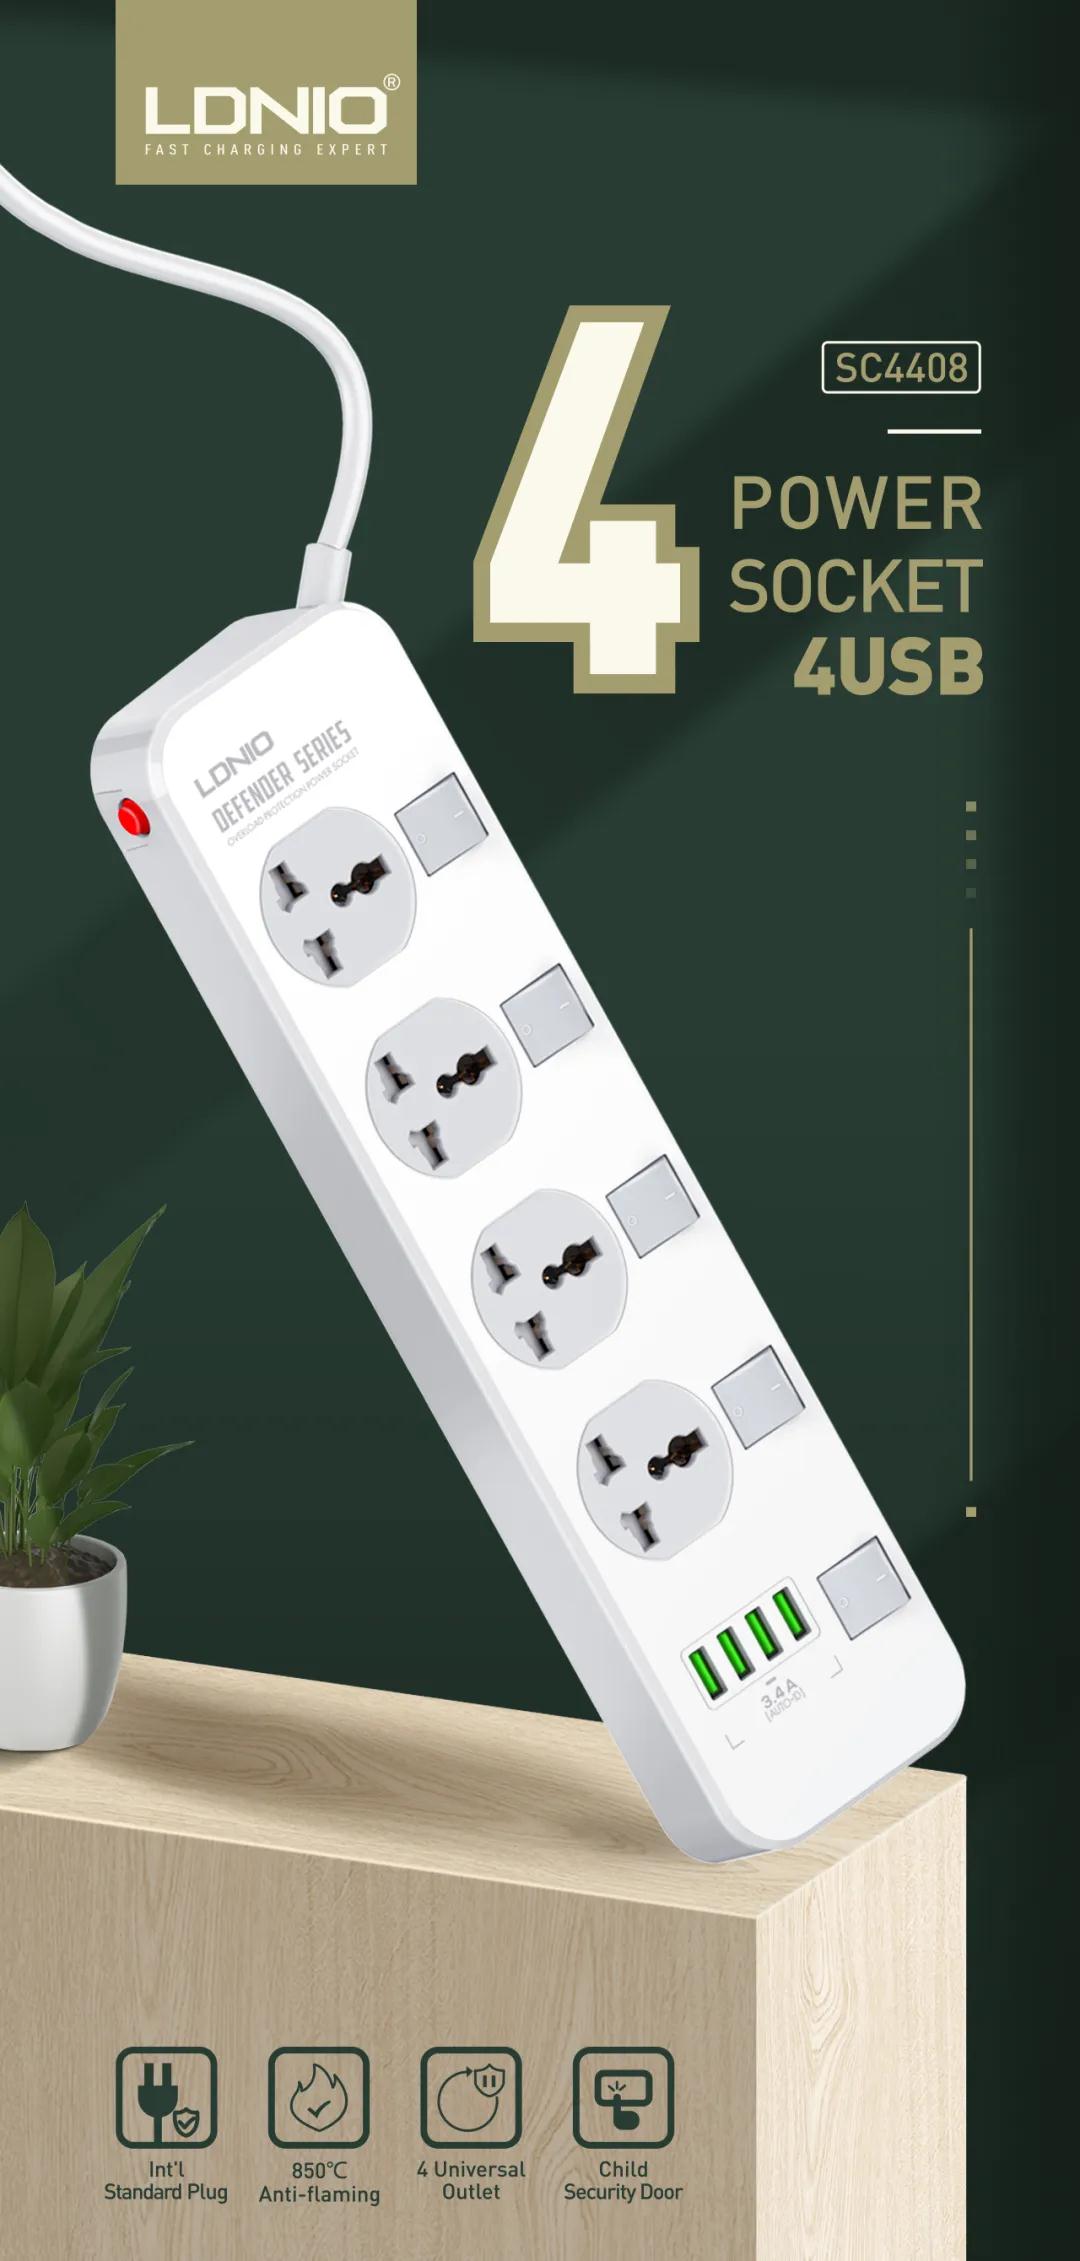 LDNIO-2500W-Power-Strip-4-Universal-Outlets-4-USB-Charger-Ports-Surge-Protector-EU-Plug-Input-For-Ho-1663102-1